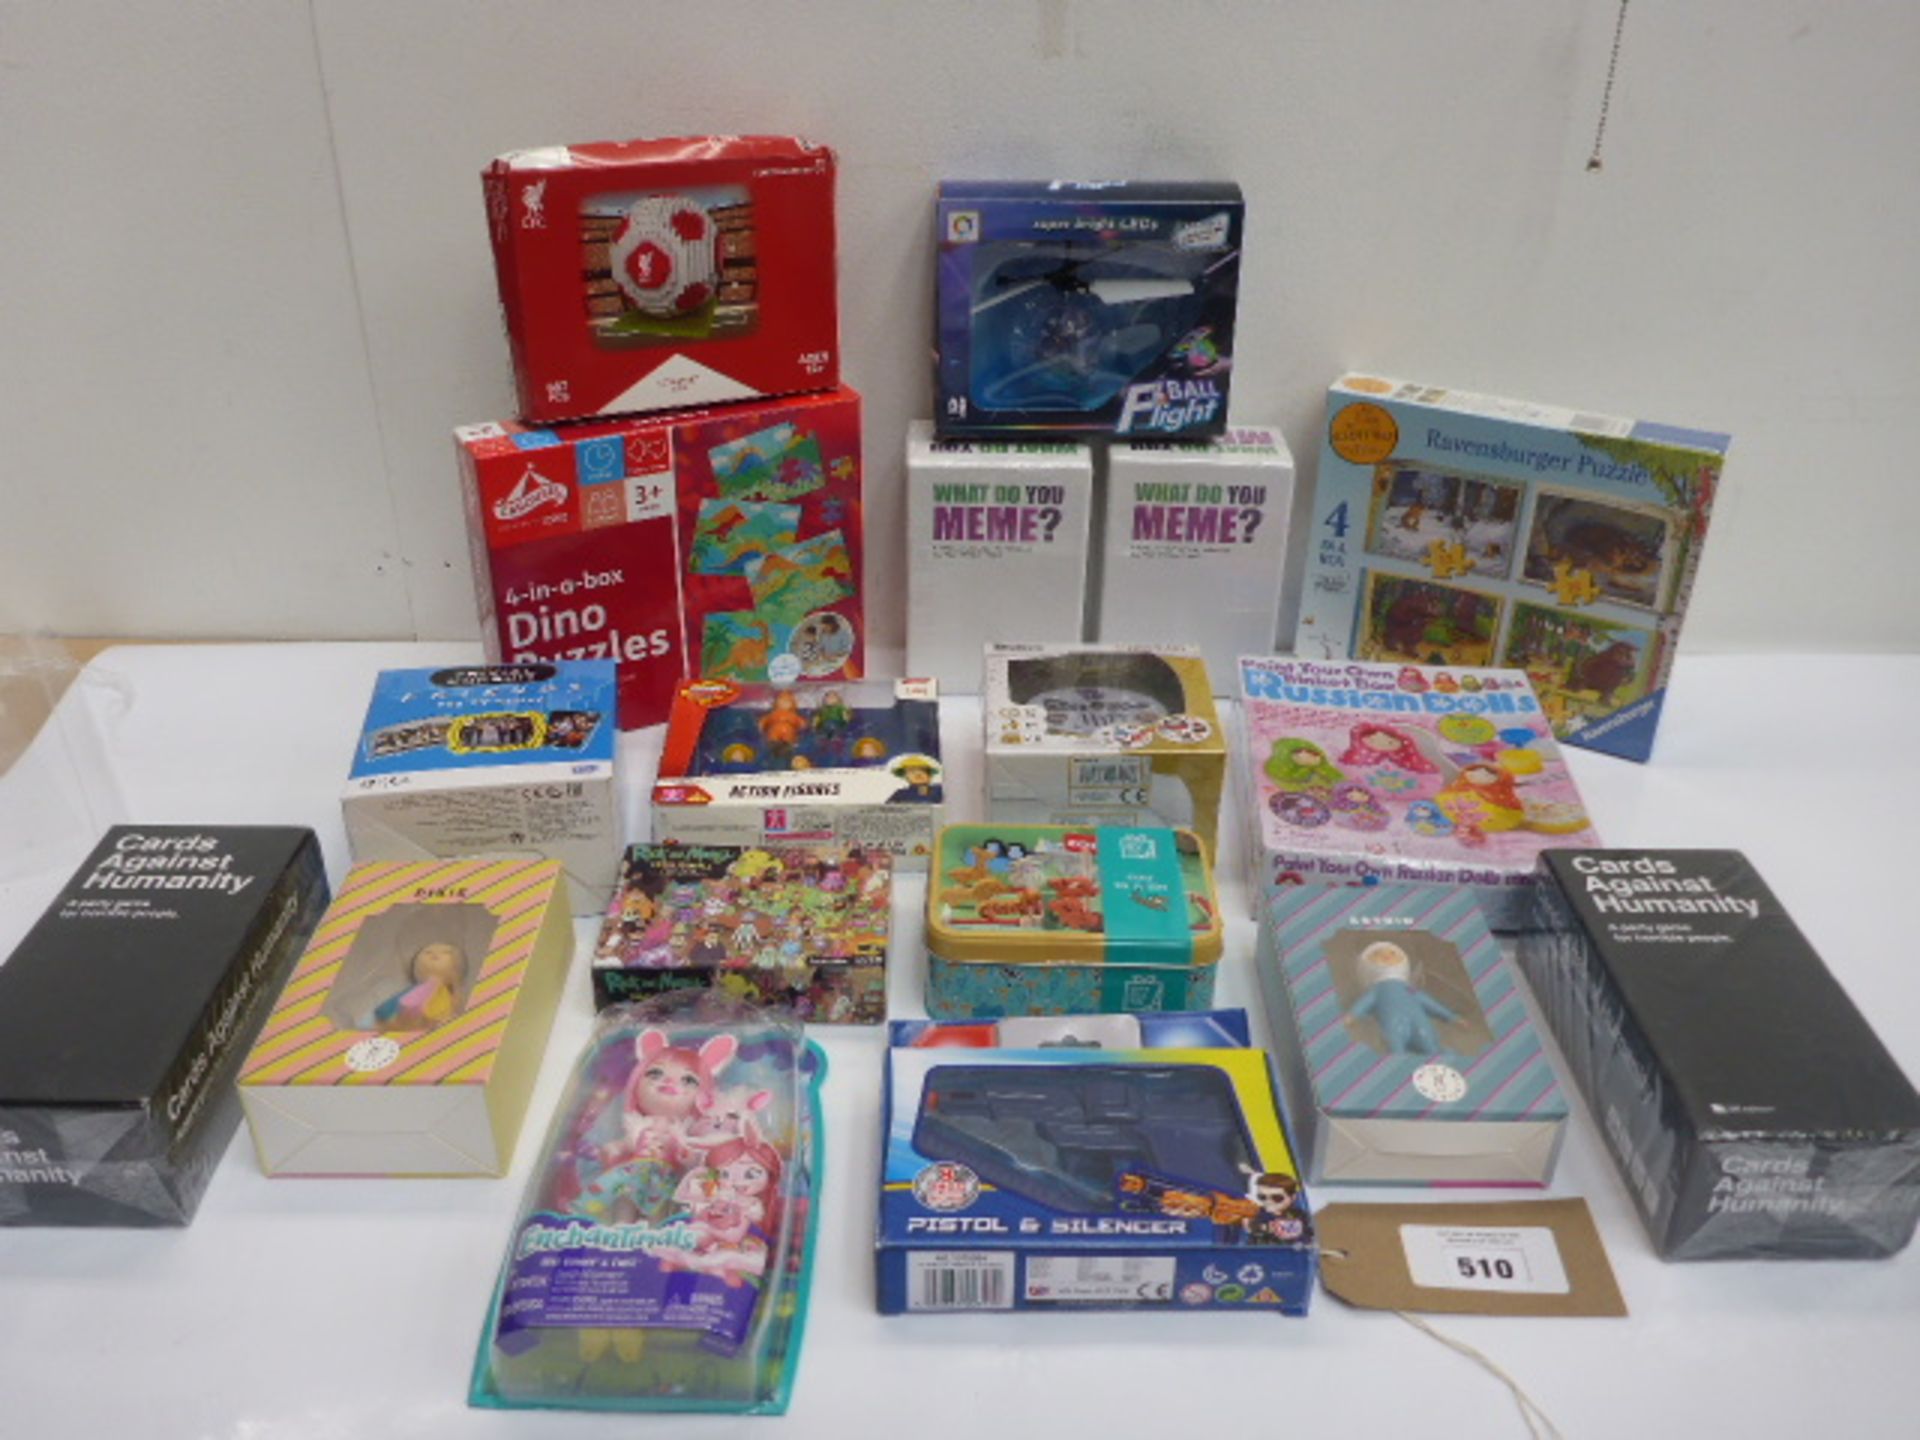 18 toys and games including What Do You Meme?, Cards Against Humanity, Trival Pursuit, jigsaws,